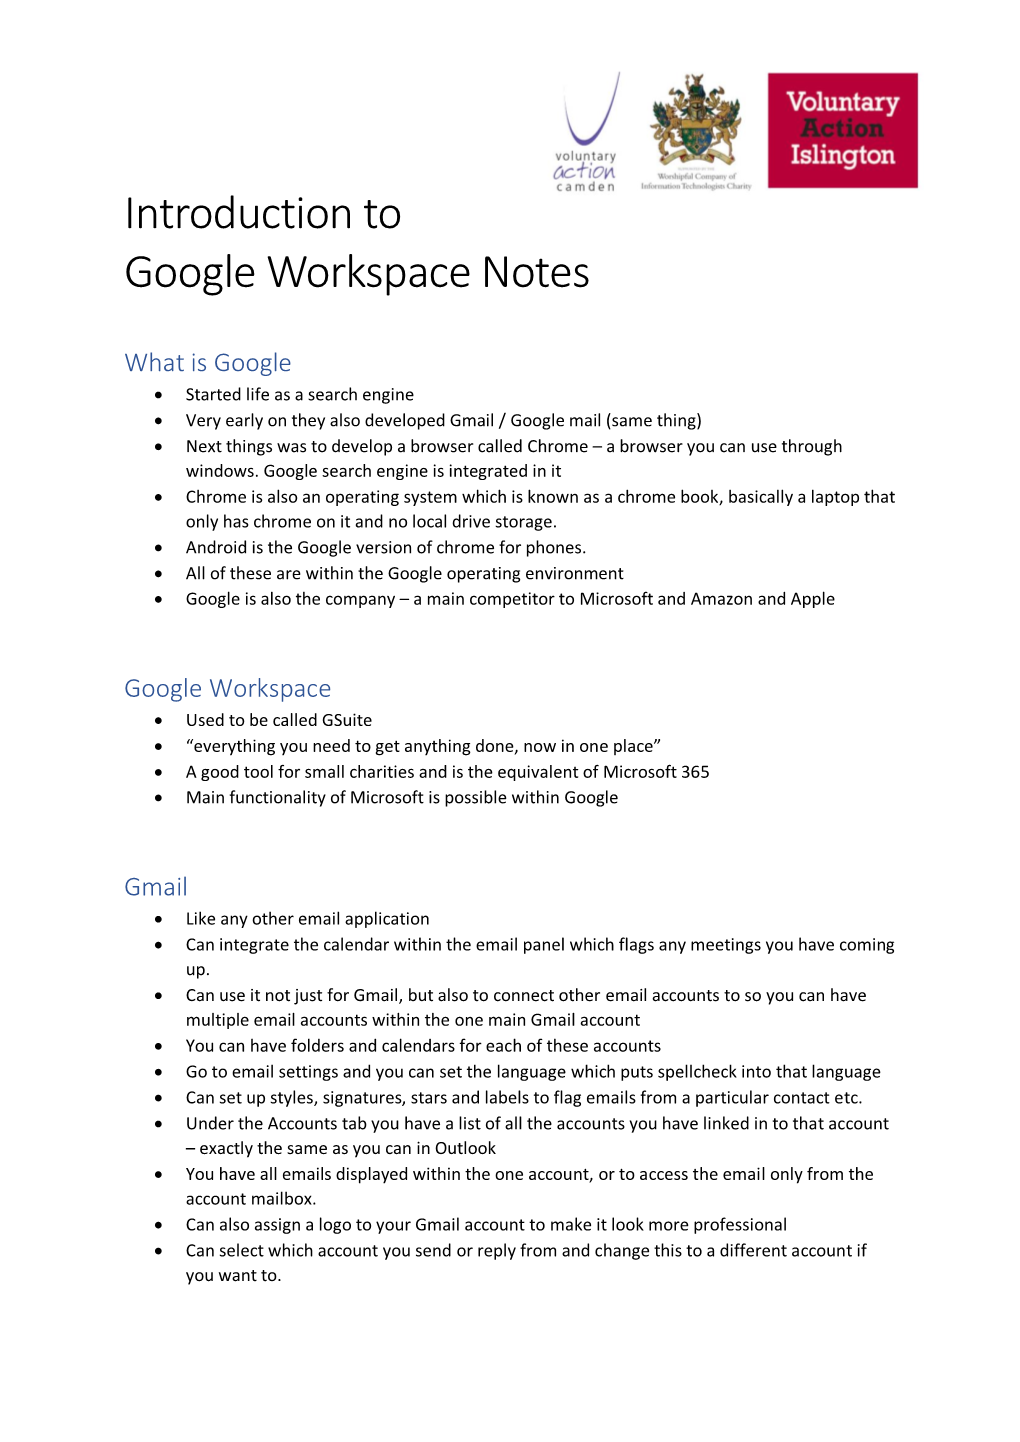 Introduction to Google Workspace Notes